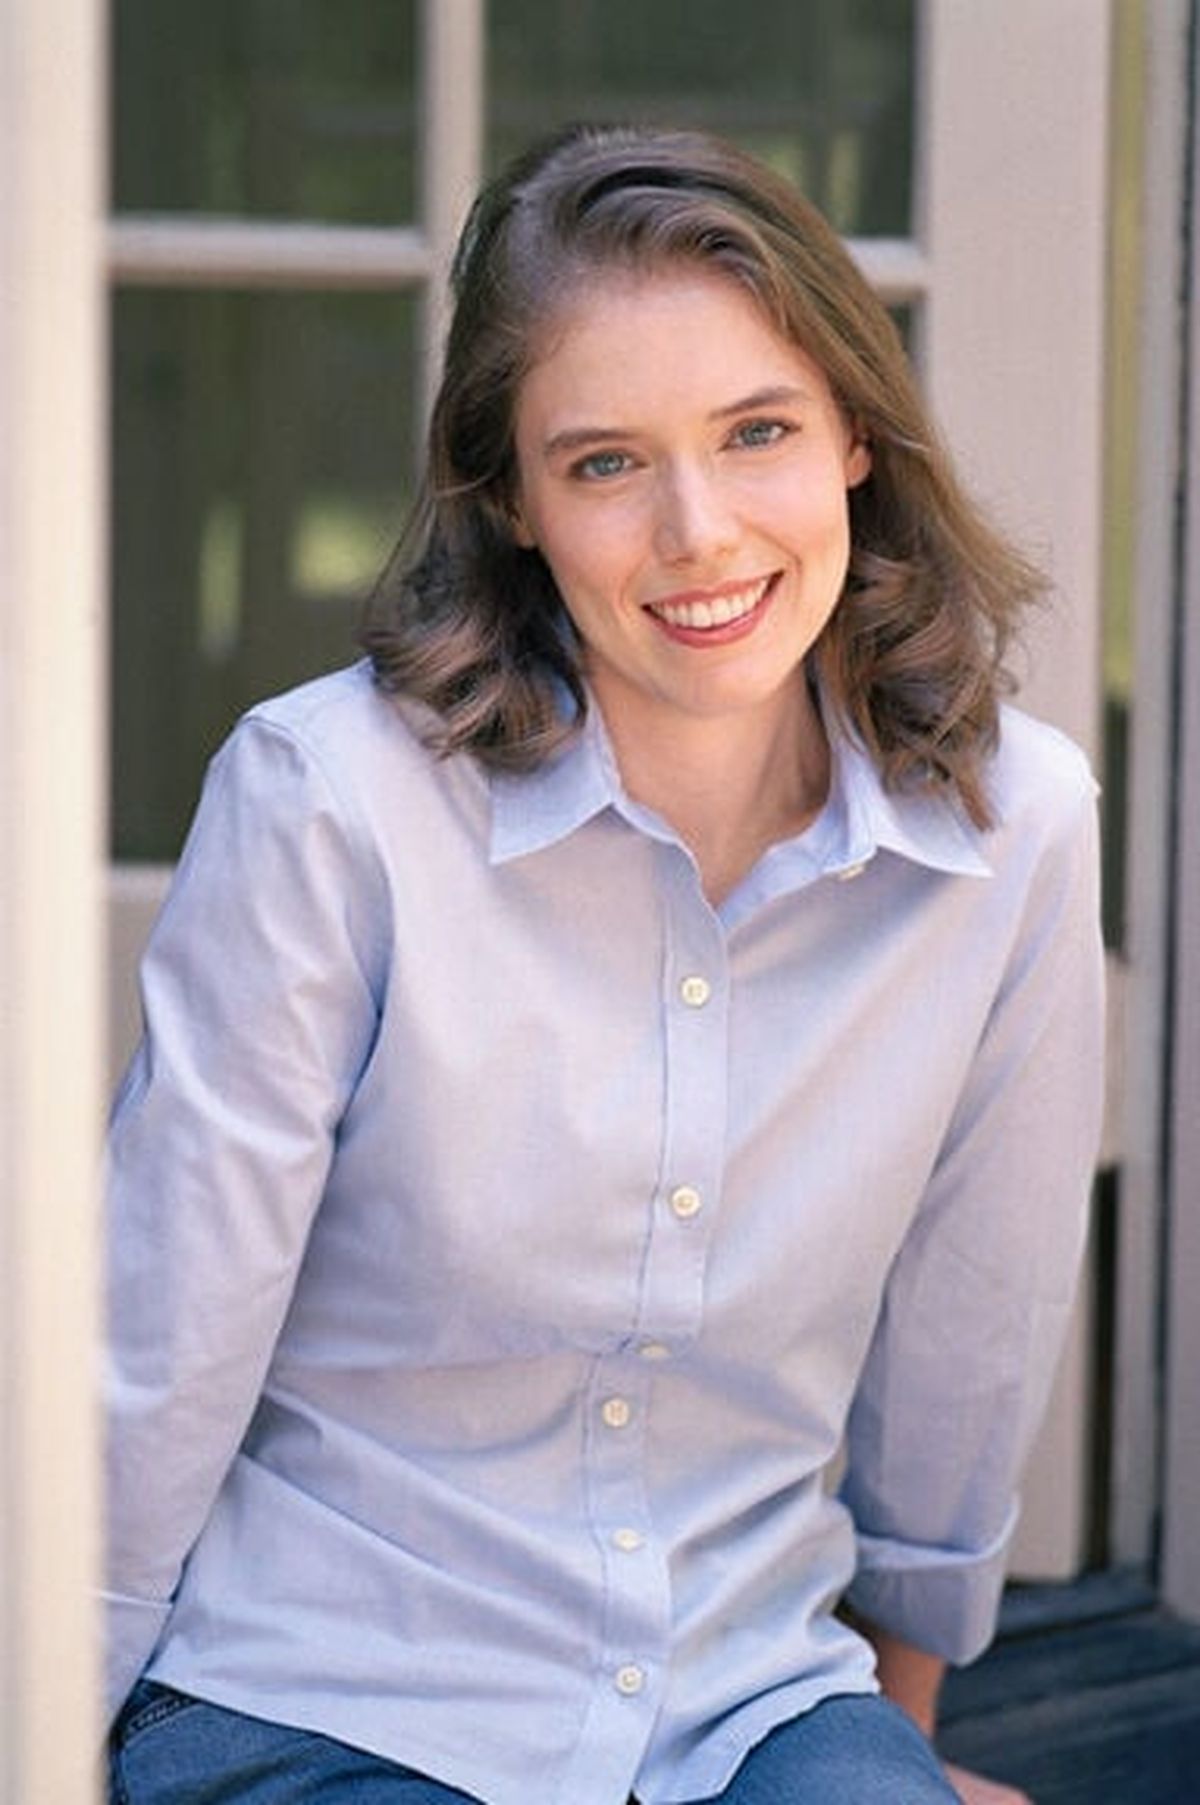 Madeline Miller, author of “Circe” and “The Song of Achilles,” will be featured in the Spokane County Library District’s Online Authors Series event on Thursday.  (Courtesy)